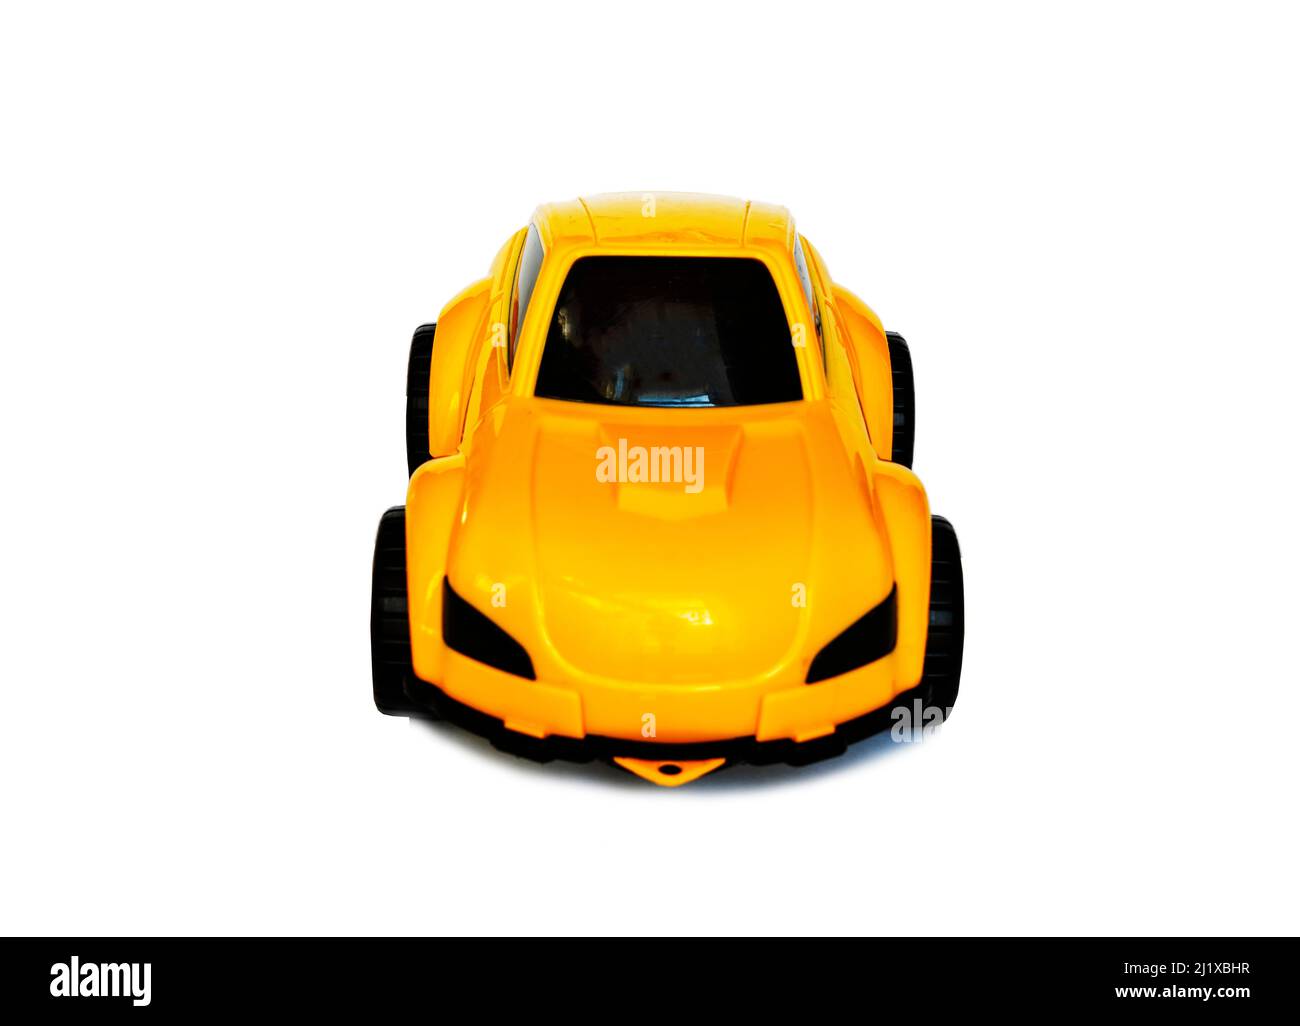 Children's yellow plastic toy car on a white background Stock Photo